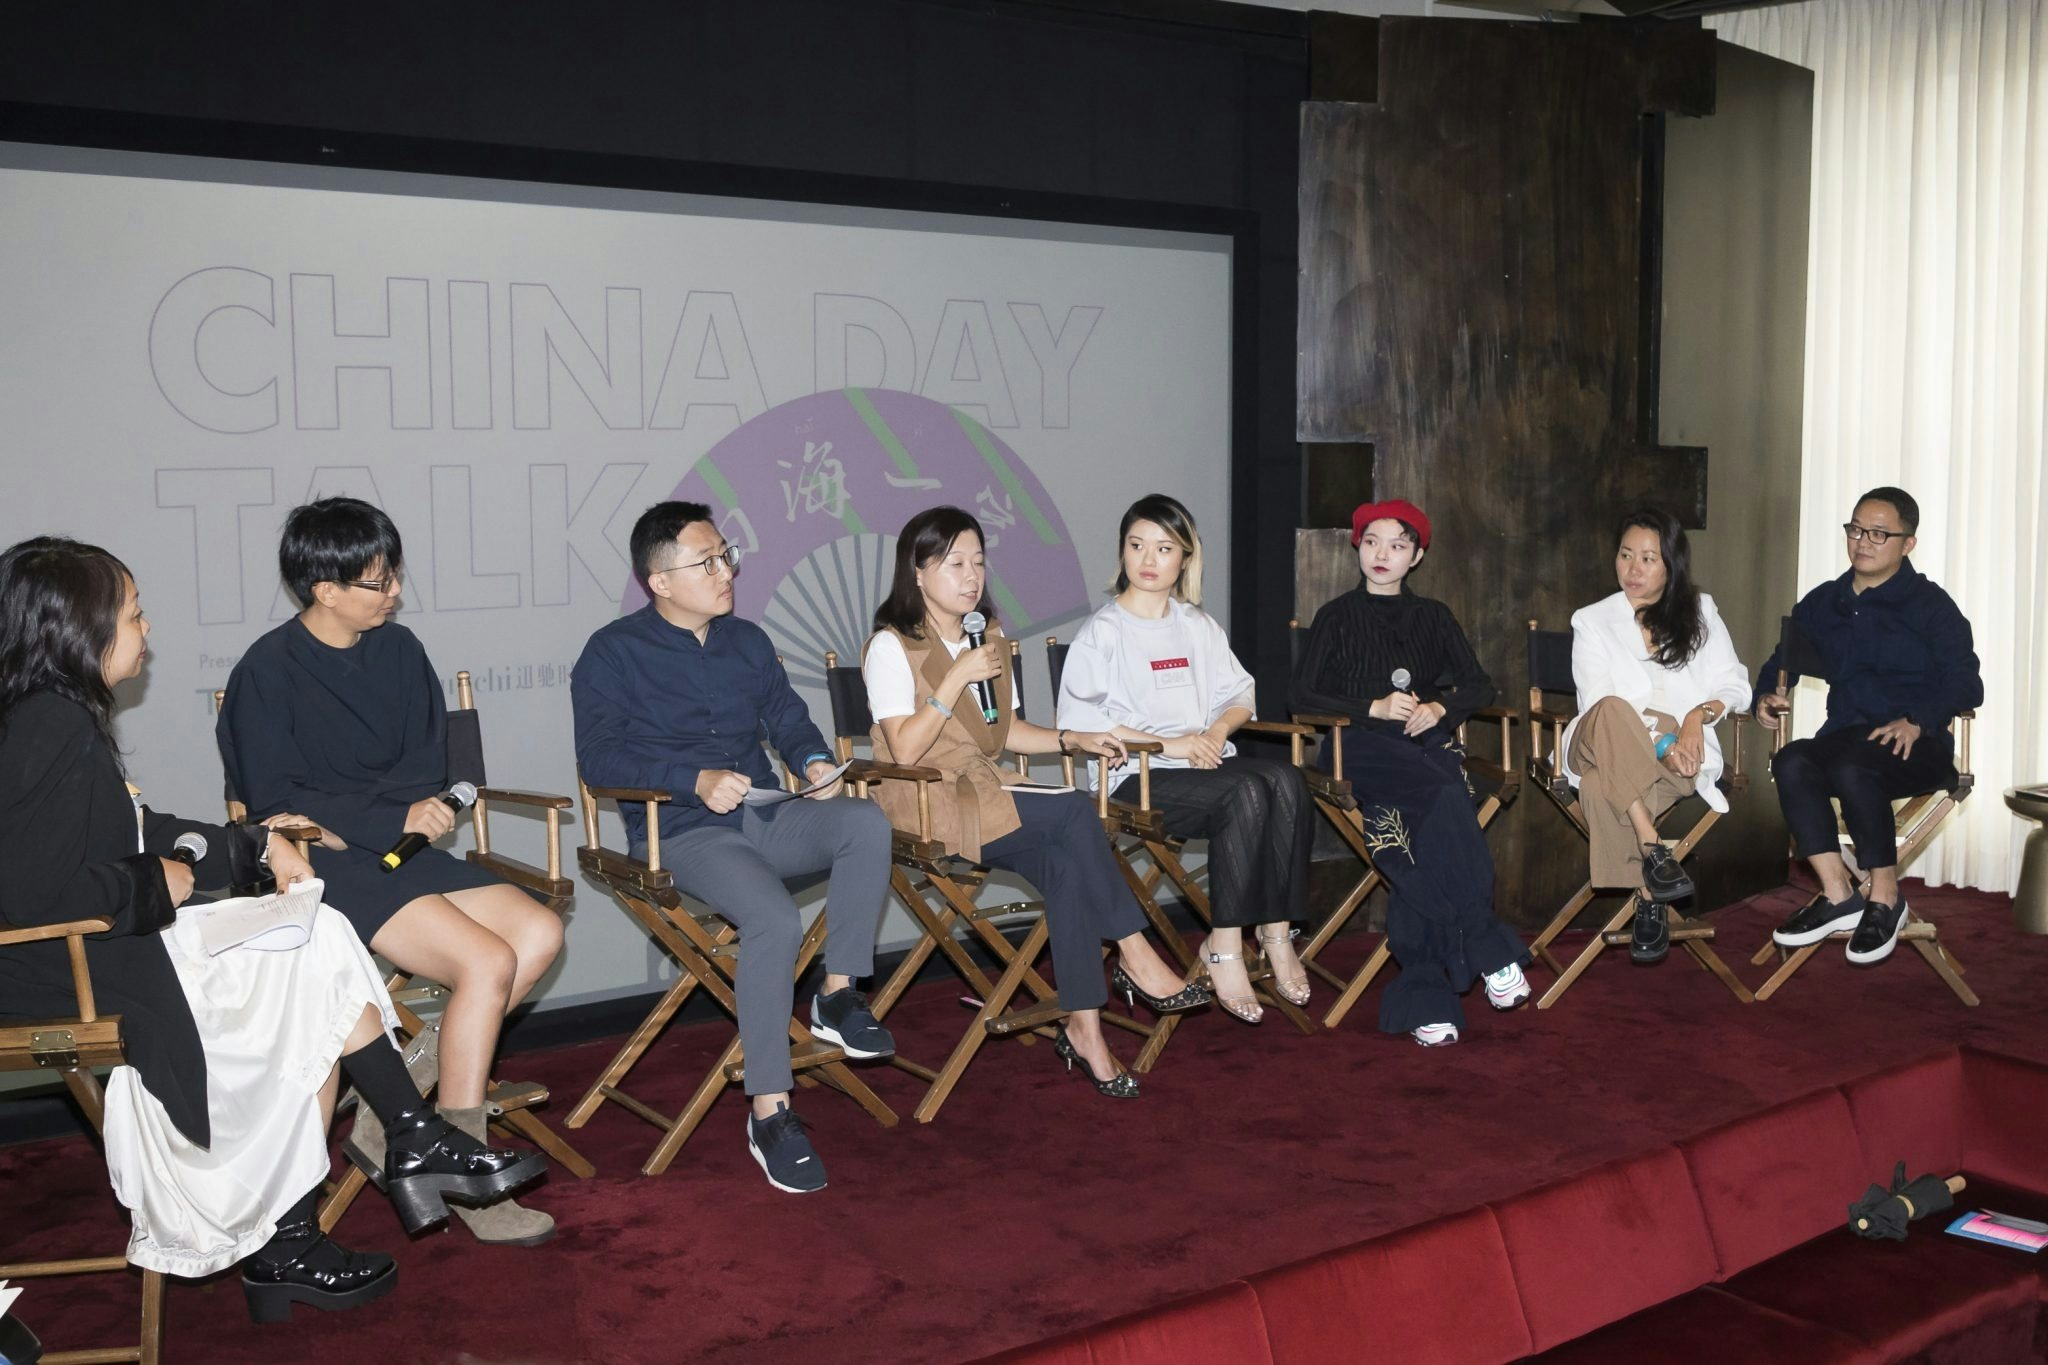 Tmall's panel discussion on Sunday's press conference. From left to right: Shawey Yeh from Nowness, Lin Li from JNBY, Bo Liu, President of Tmall Marketing and Operations, Jessica Liu, President of Tmall Fashion, Jieyi Liu, CEO and Founder of Particle Fever, designer Angel Chen, Wen Zhou, CEO of 3.1 Phillip Lim, and Paul Fang, Founder and CEO of Suntchi. Courtesy photo